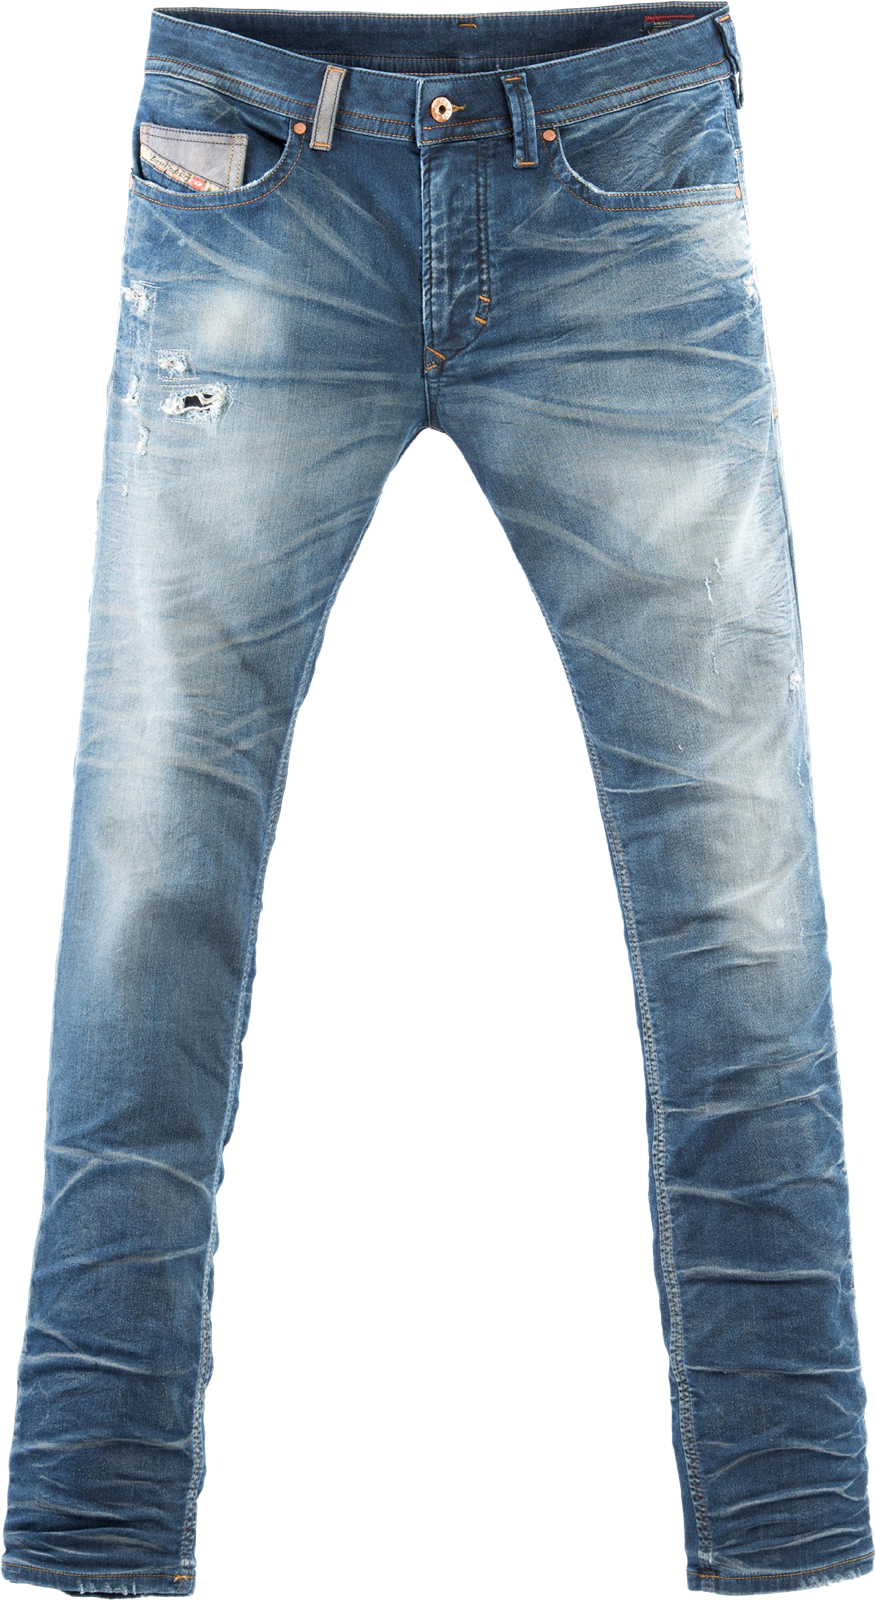 Ripped Jeans Free Transparent Image HQ PNG Image